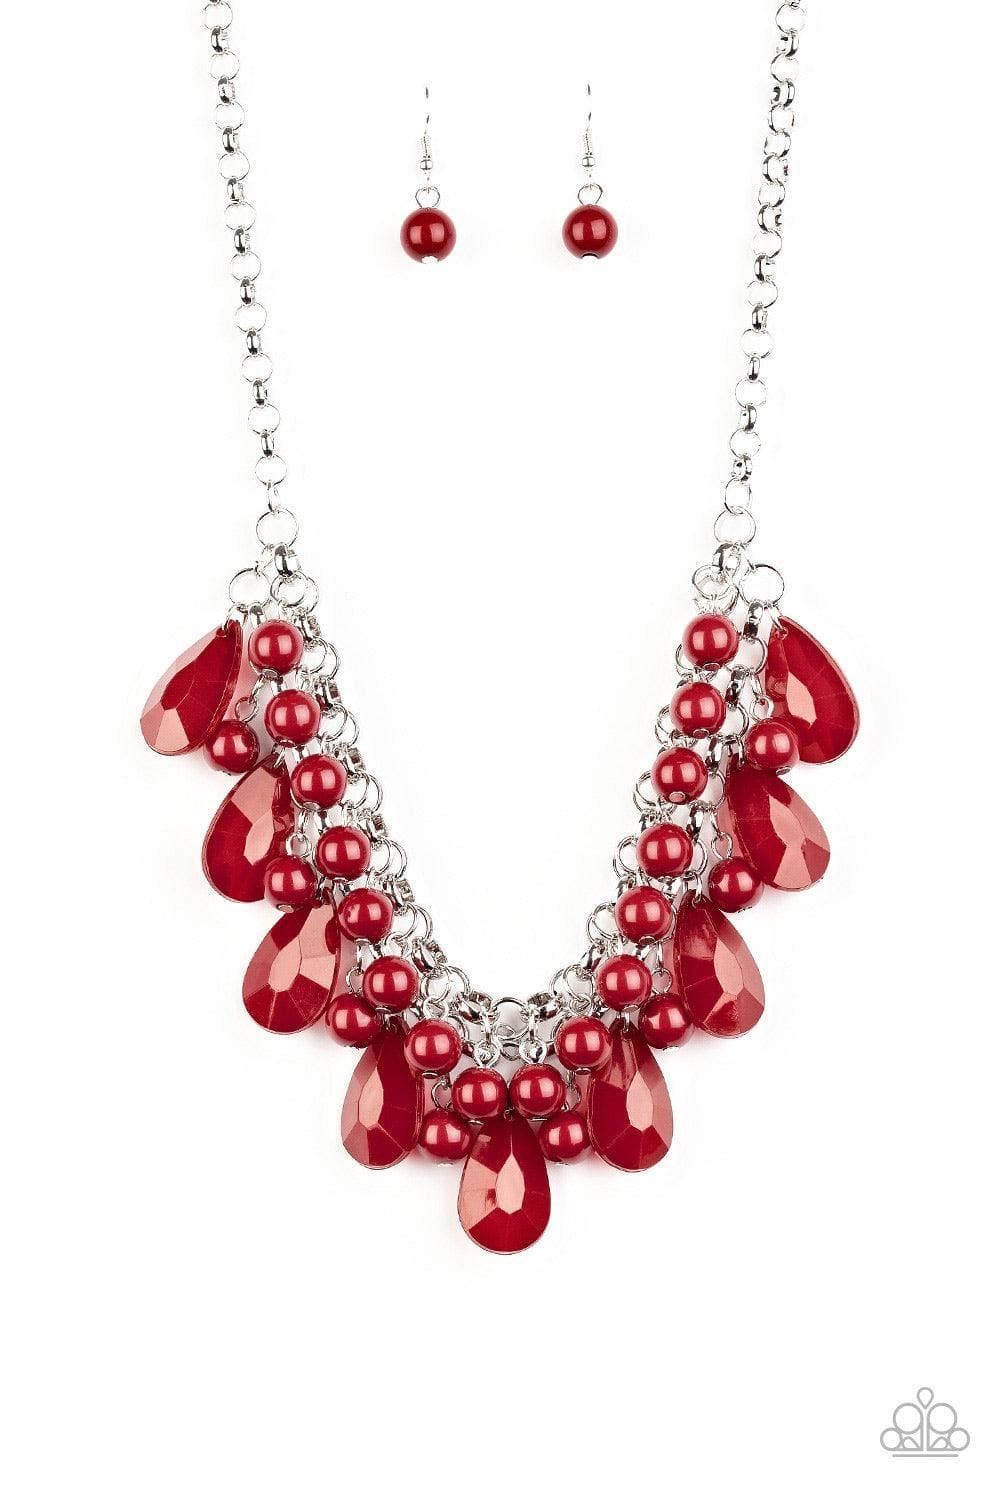 Paparazzi Accessories - Endless Effervescence - Red Necklace - Bling by JessieK